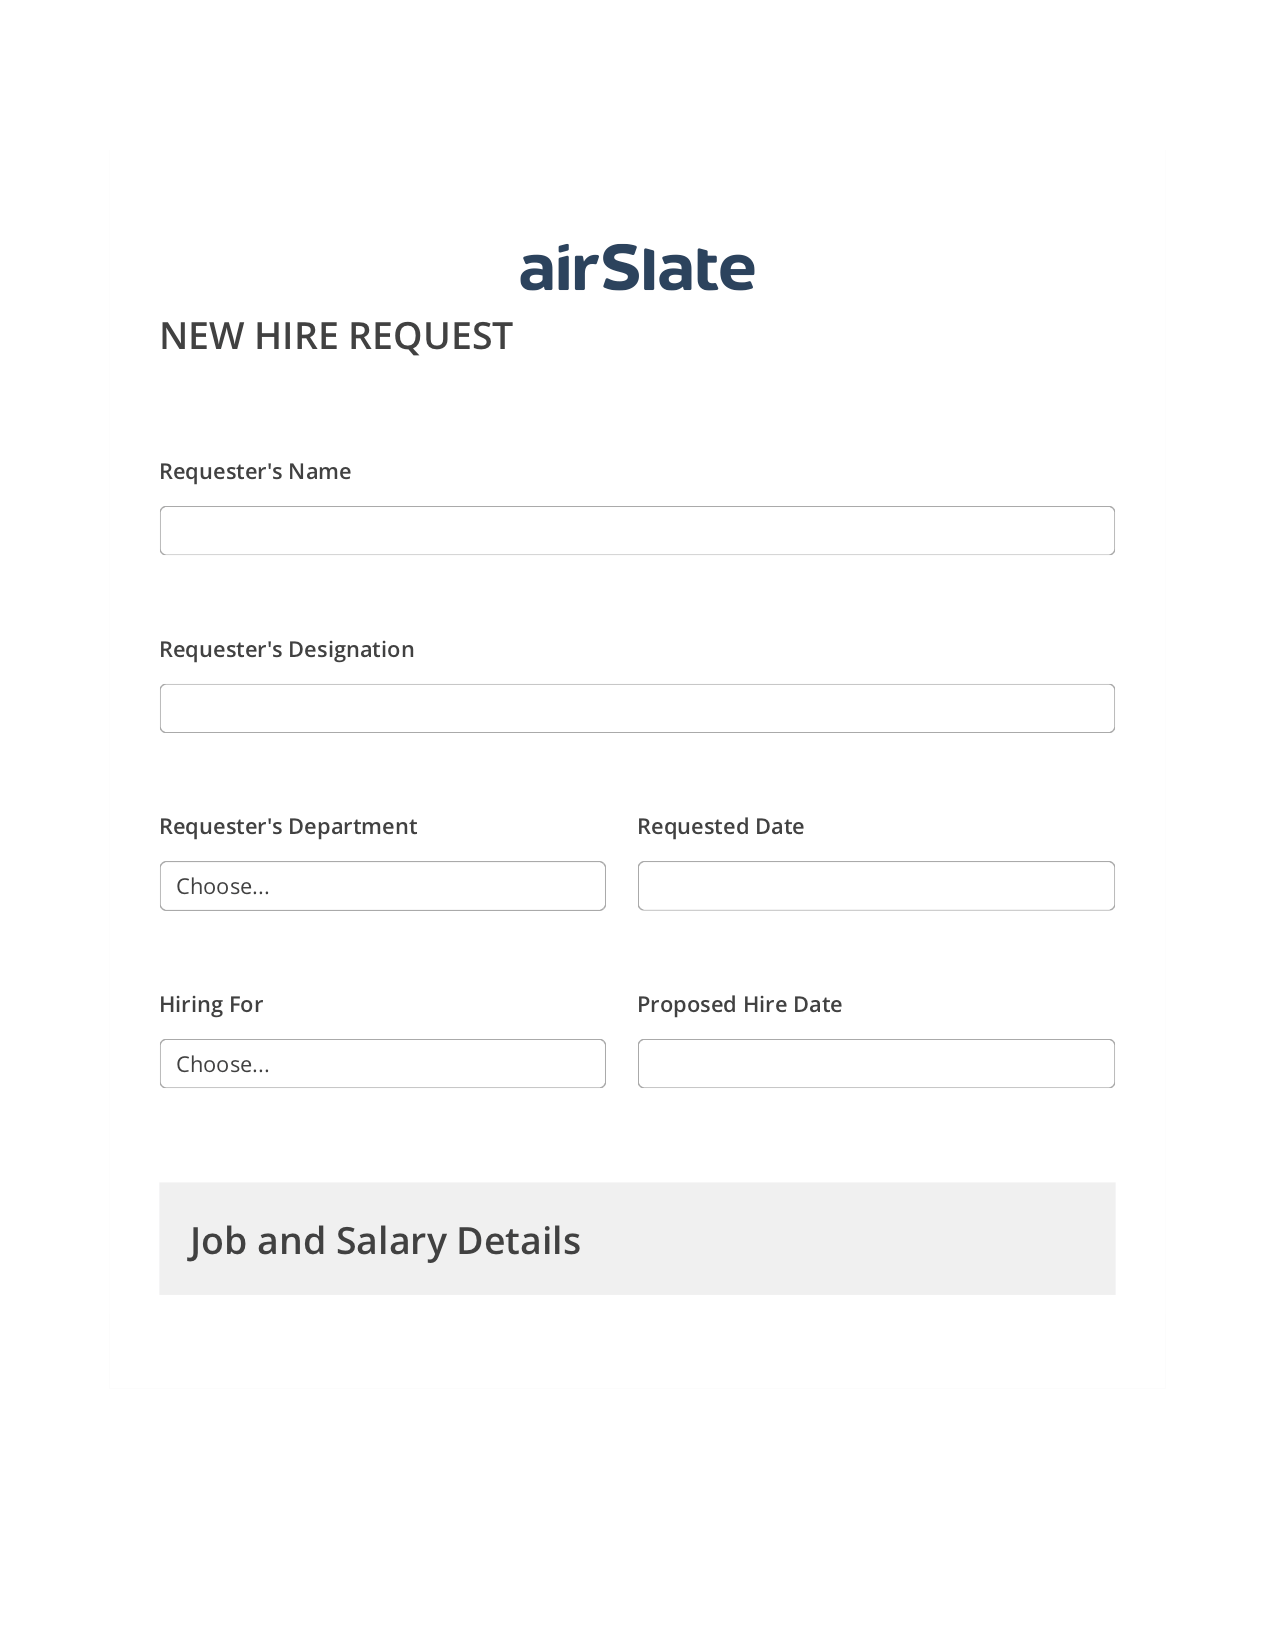 Multirole Hiring Request Workflow Pre-fill from CSV File Bot, Create Slate every Google Sheet Update Bot, Email Notification Postfinish Bot